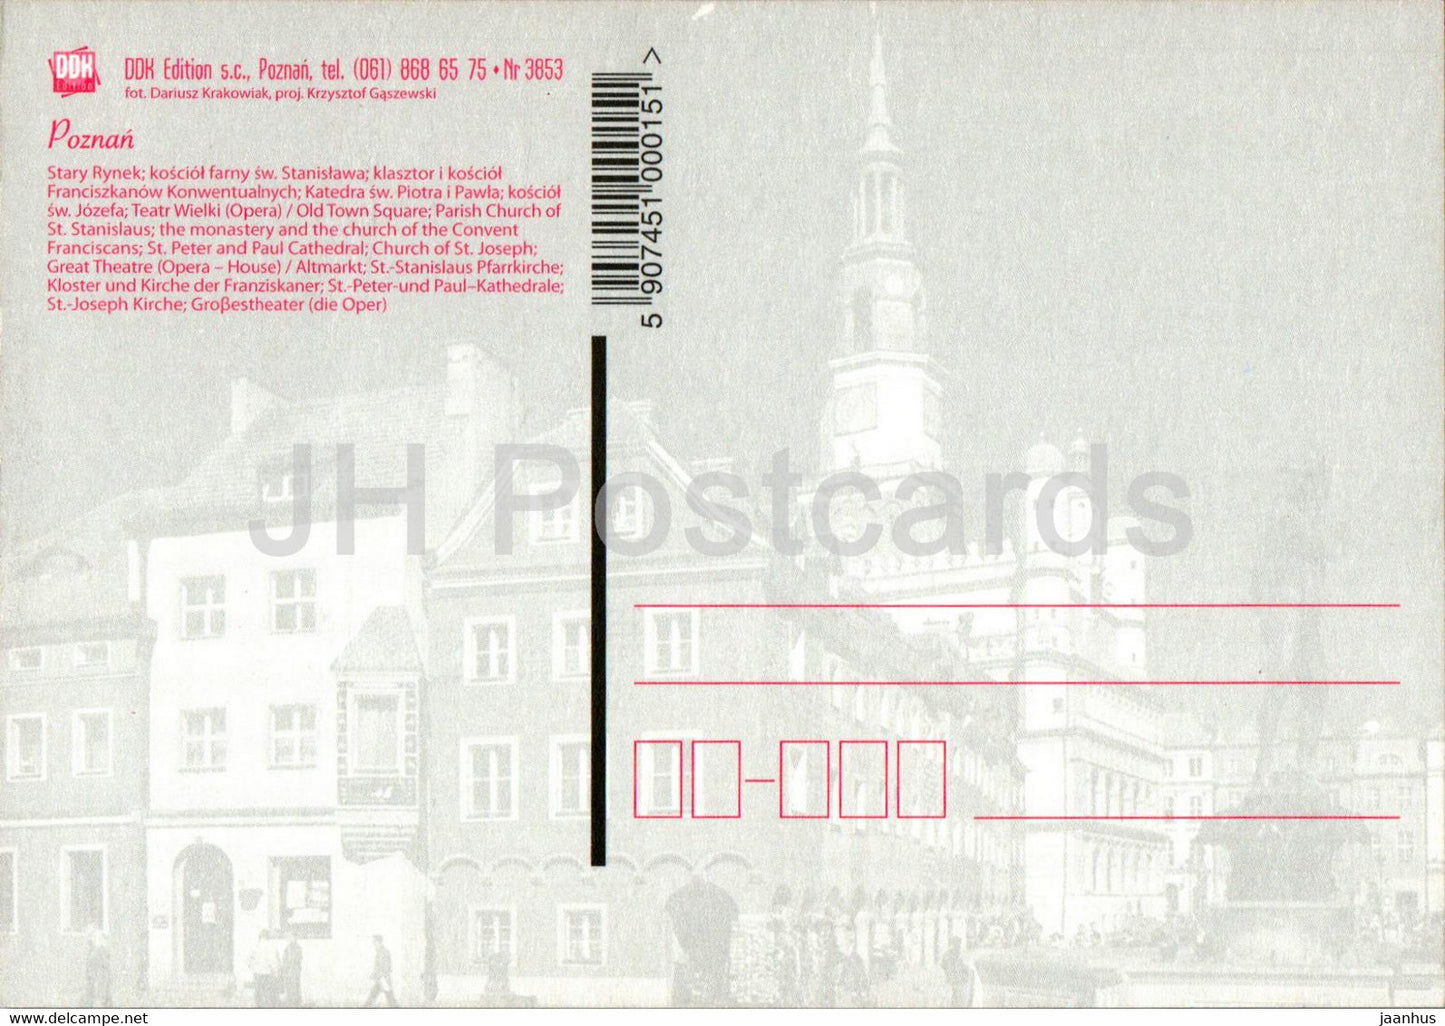 Poznan - Stary Rynek - Old Town Square - Parish Church of St Stanislaus - horse carriage - multiview - Poland - unused